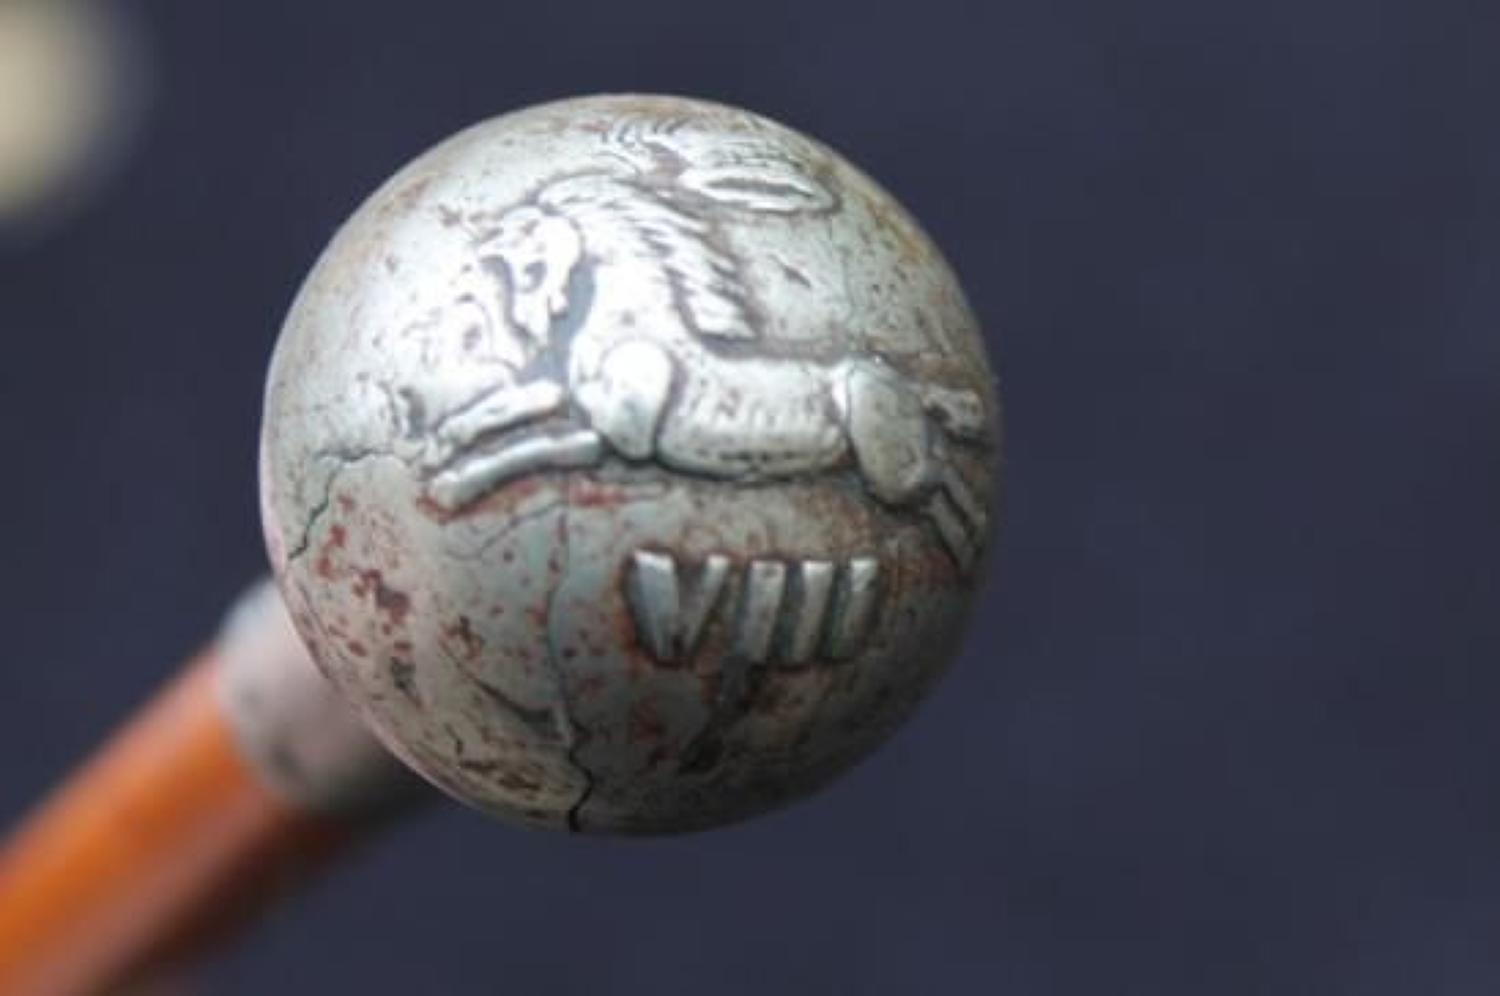 VIII Kings Liverpool Regiment Swagger Stick